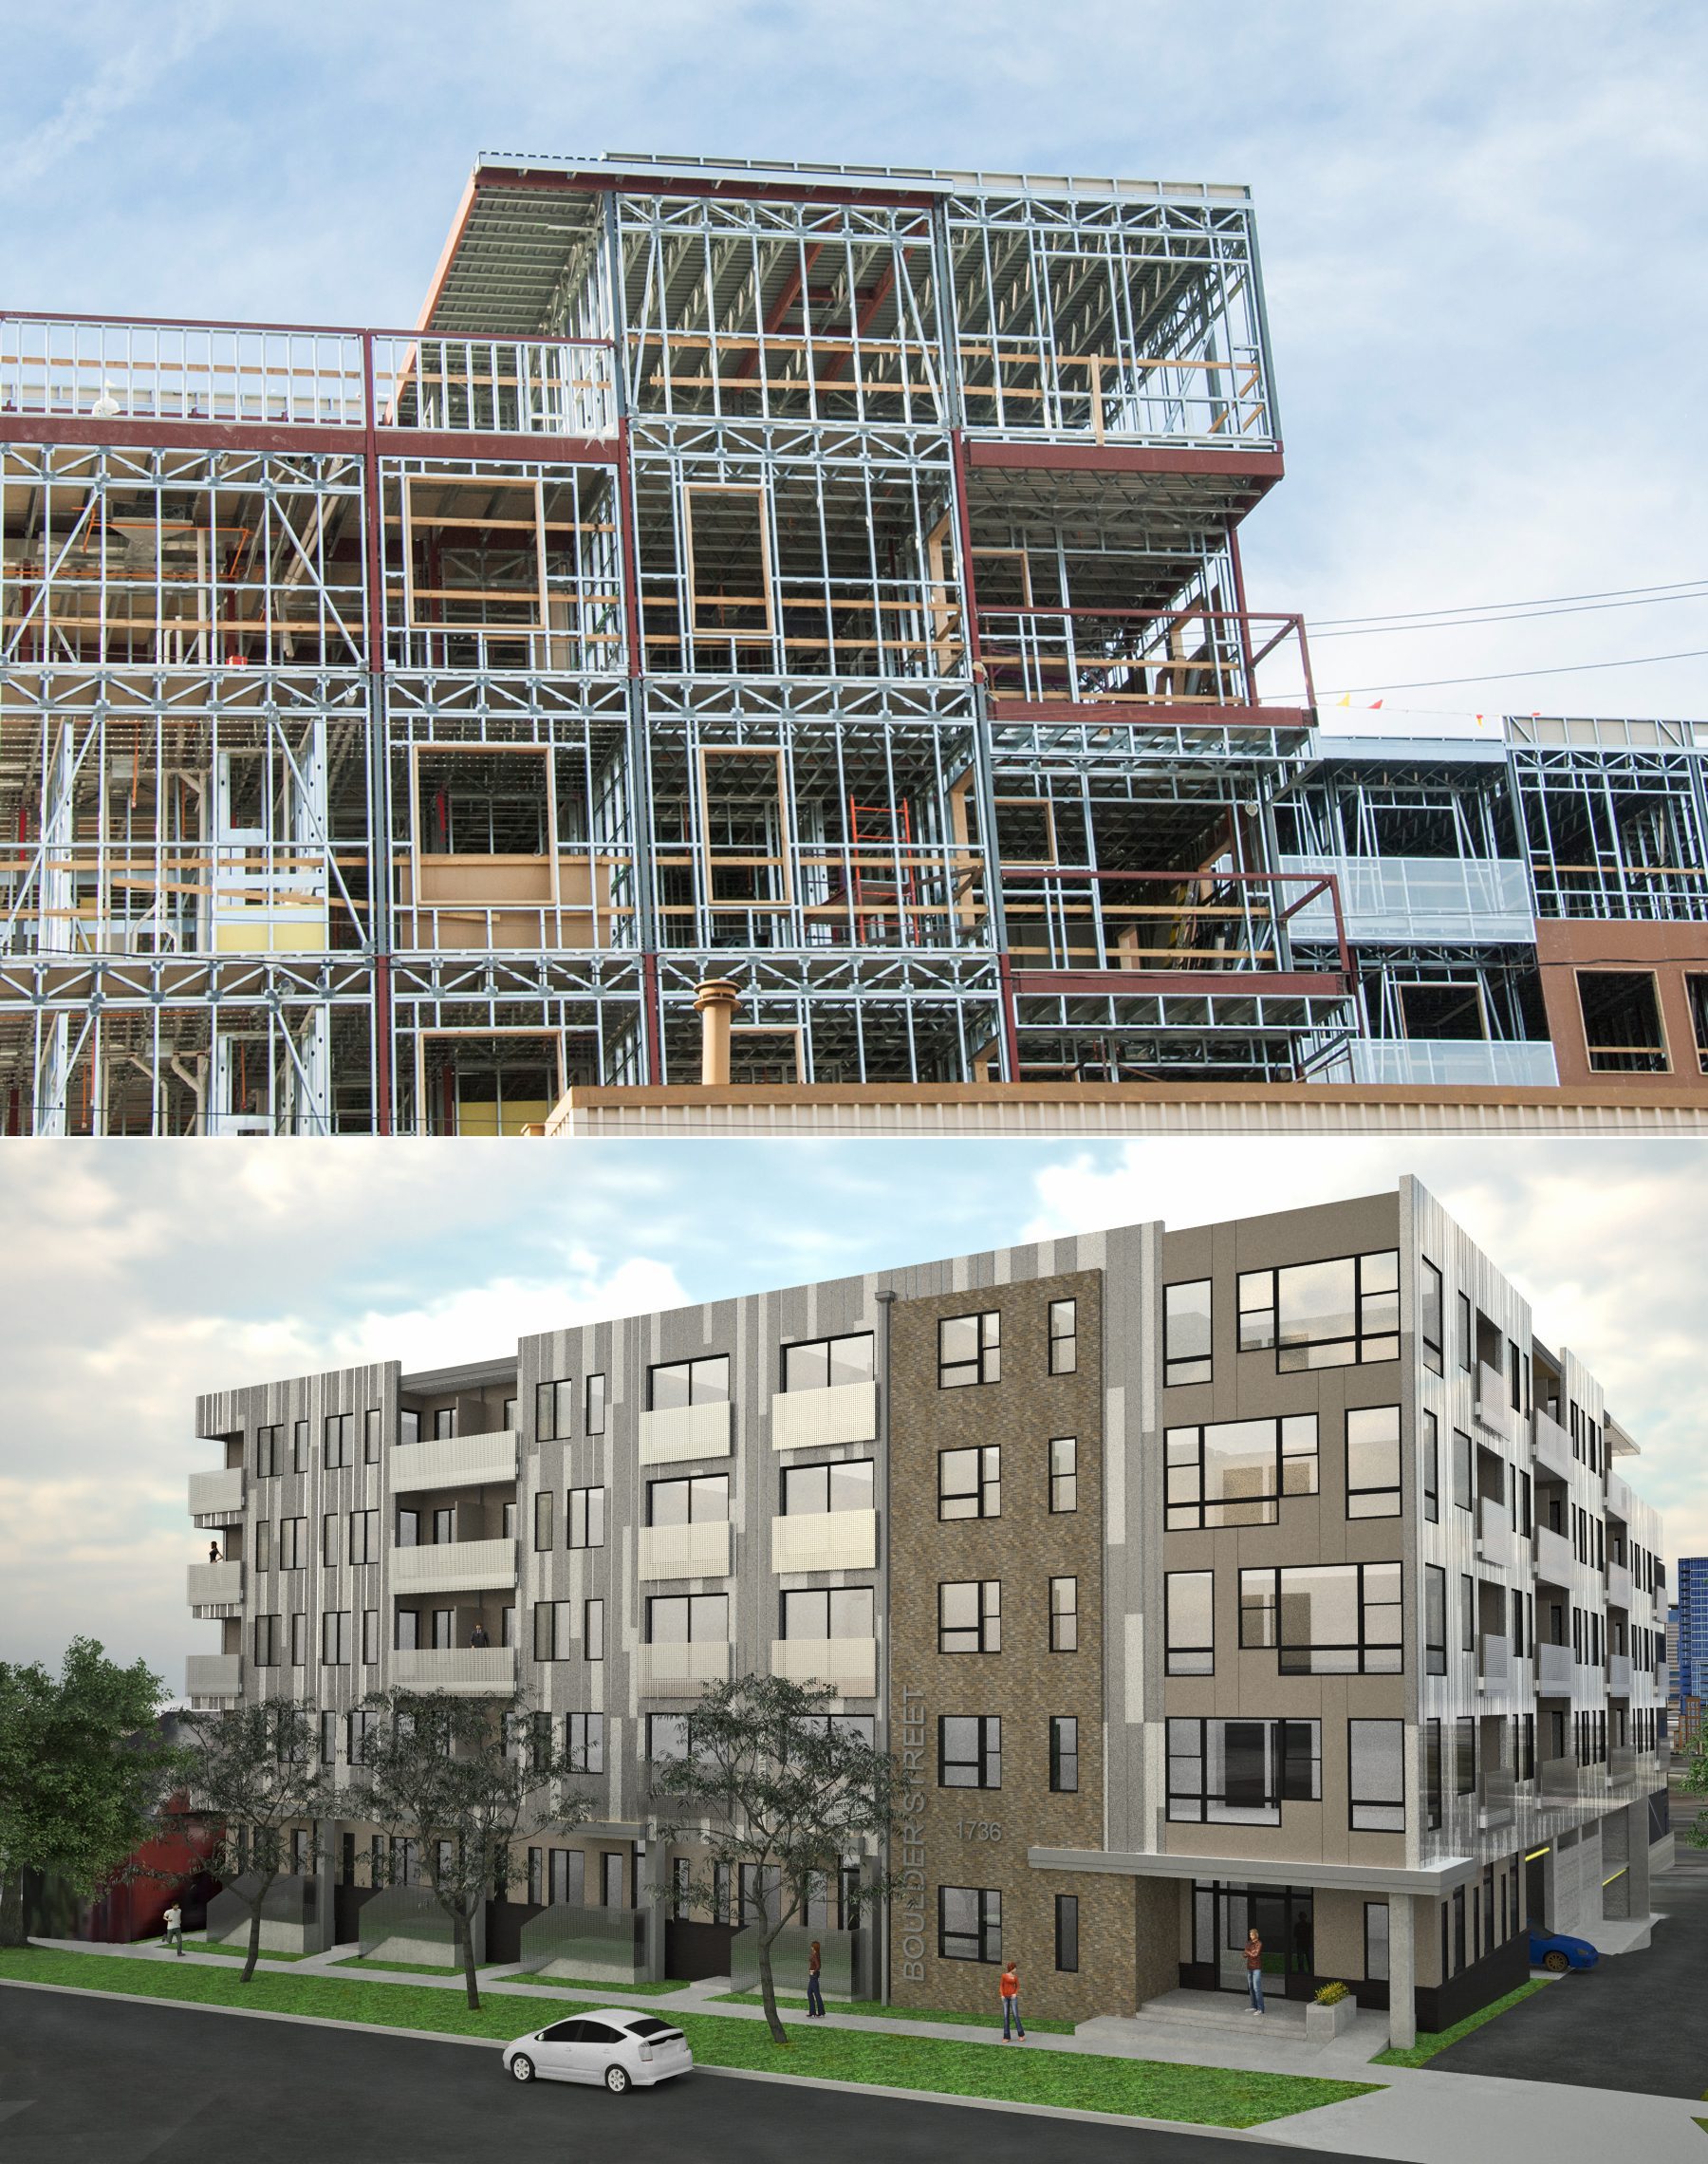 Components of the structural system can be seen in these photos of the B Street LoHi building.